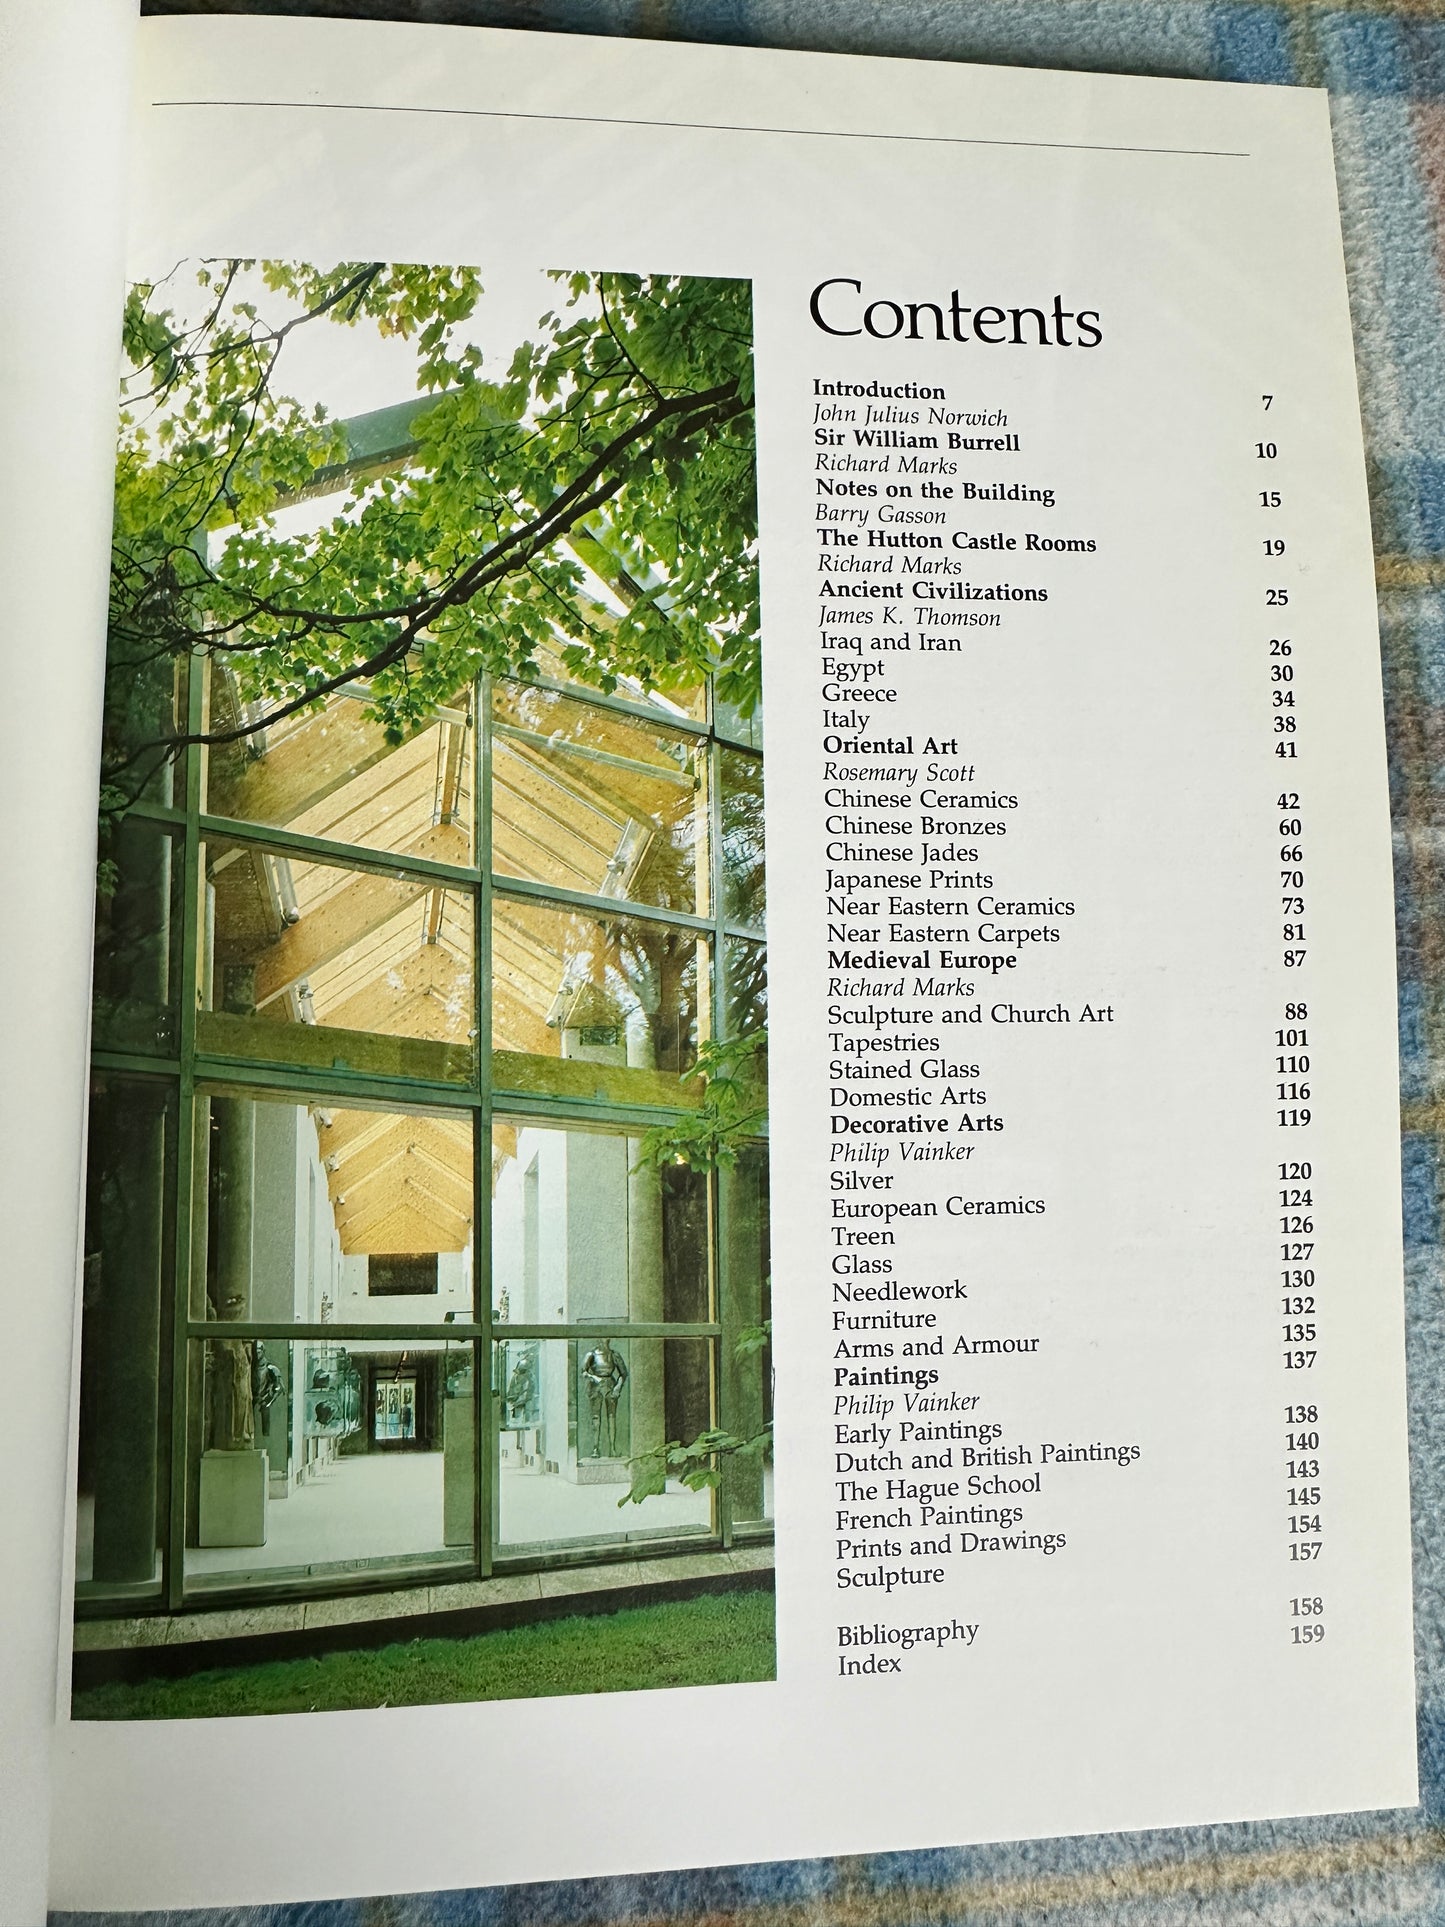 1985 The Burrell Collection intro by John Julius Norwich(Collins)